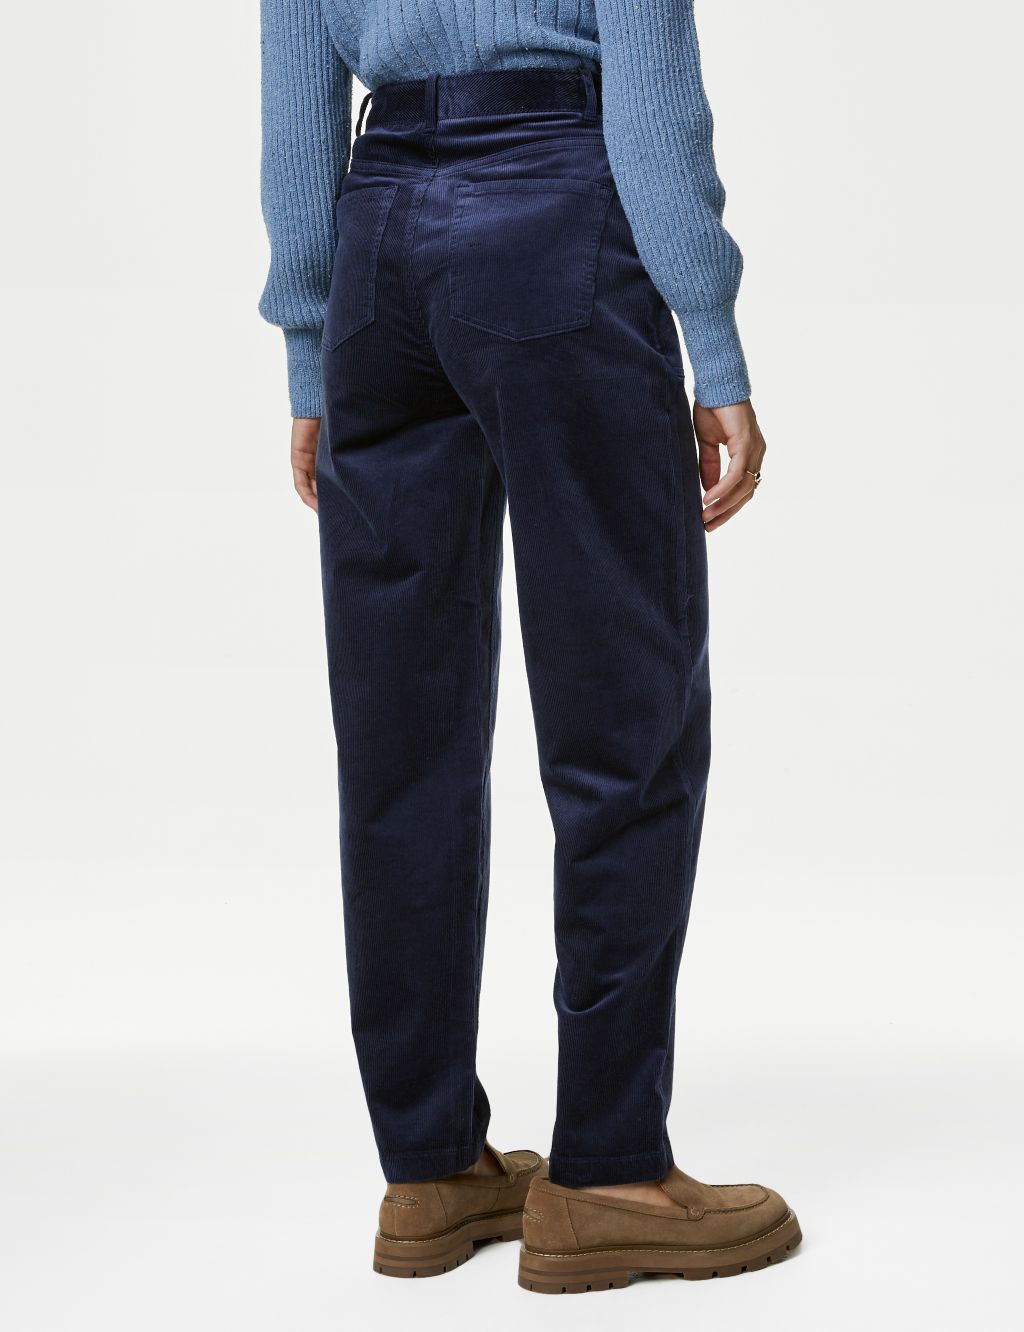 Corduroy Tapered Trousers image 5